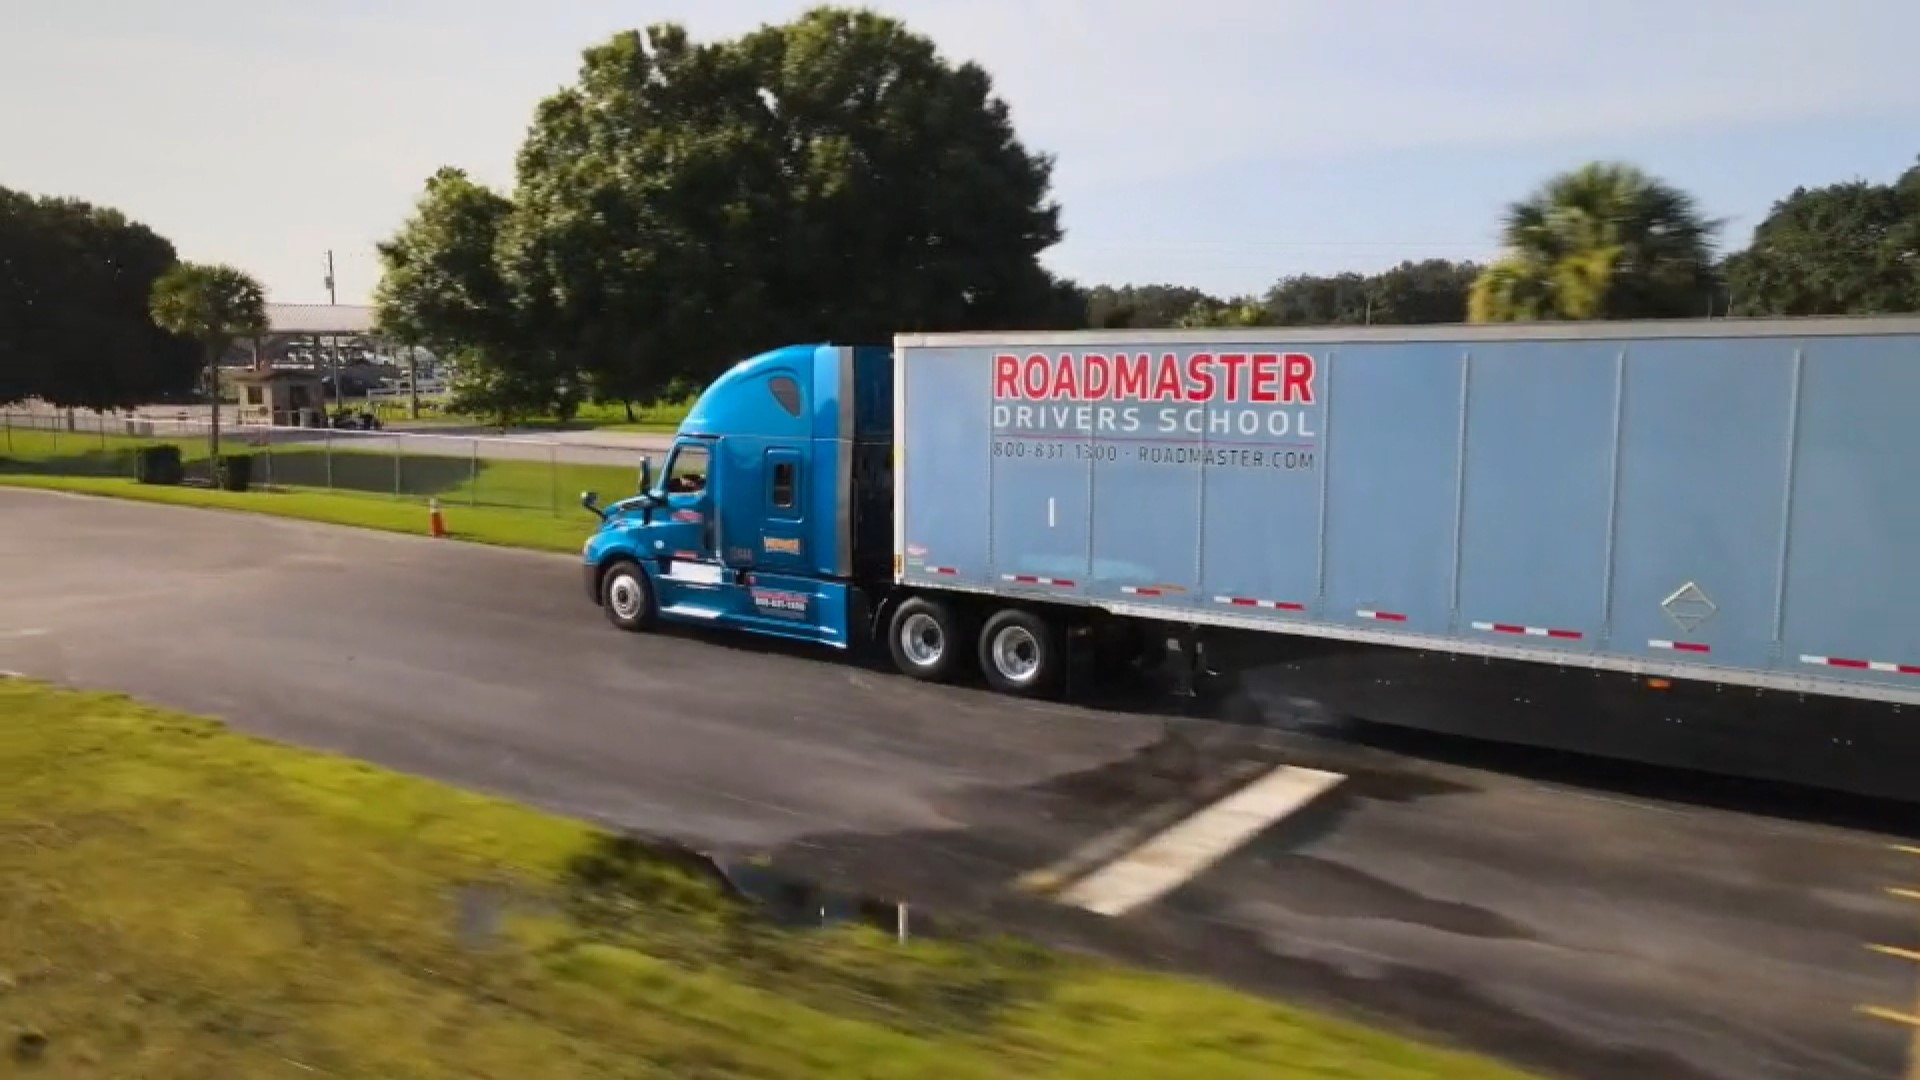 Roadmaster Drivers School in Tampa said they are expanding their schools to fit the needs of those who want their CDL.